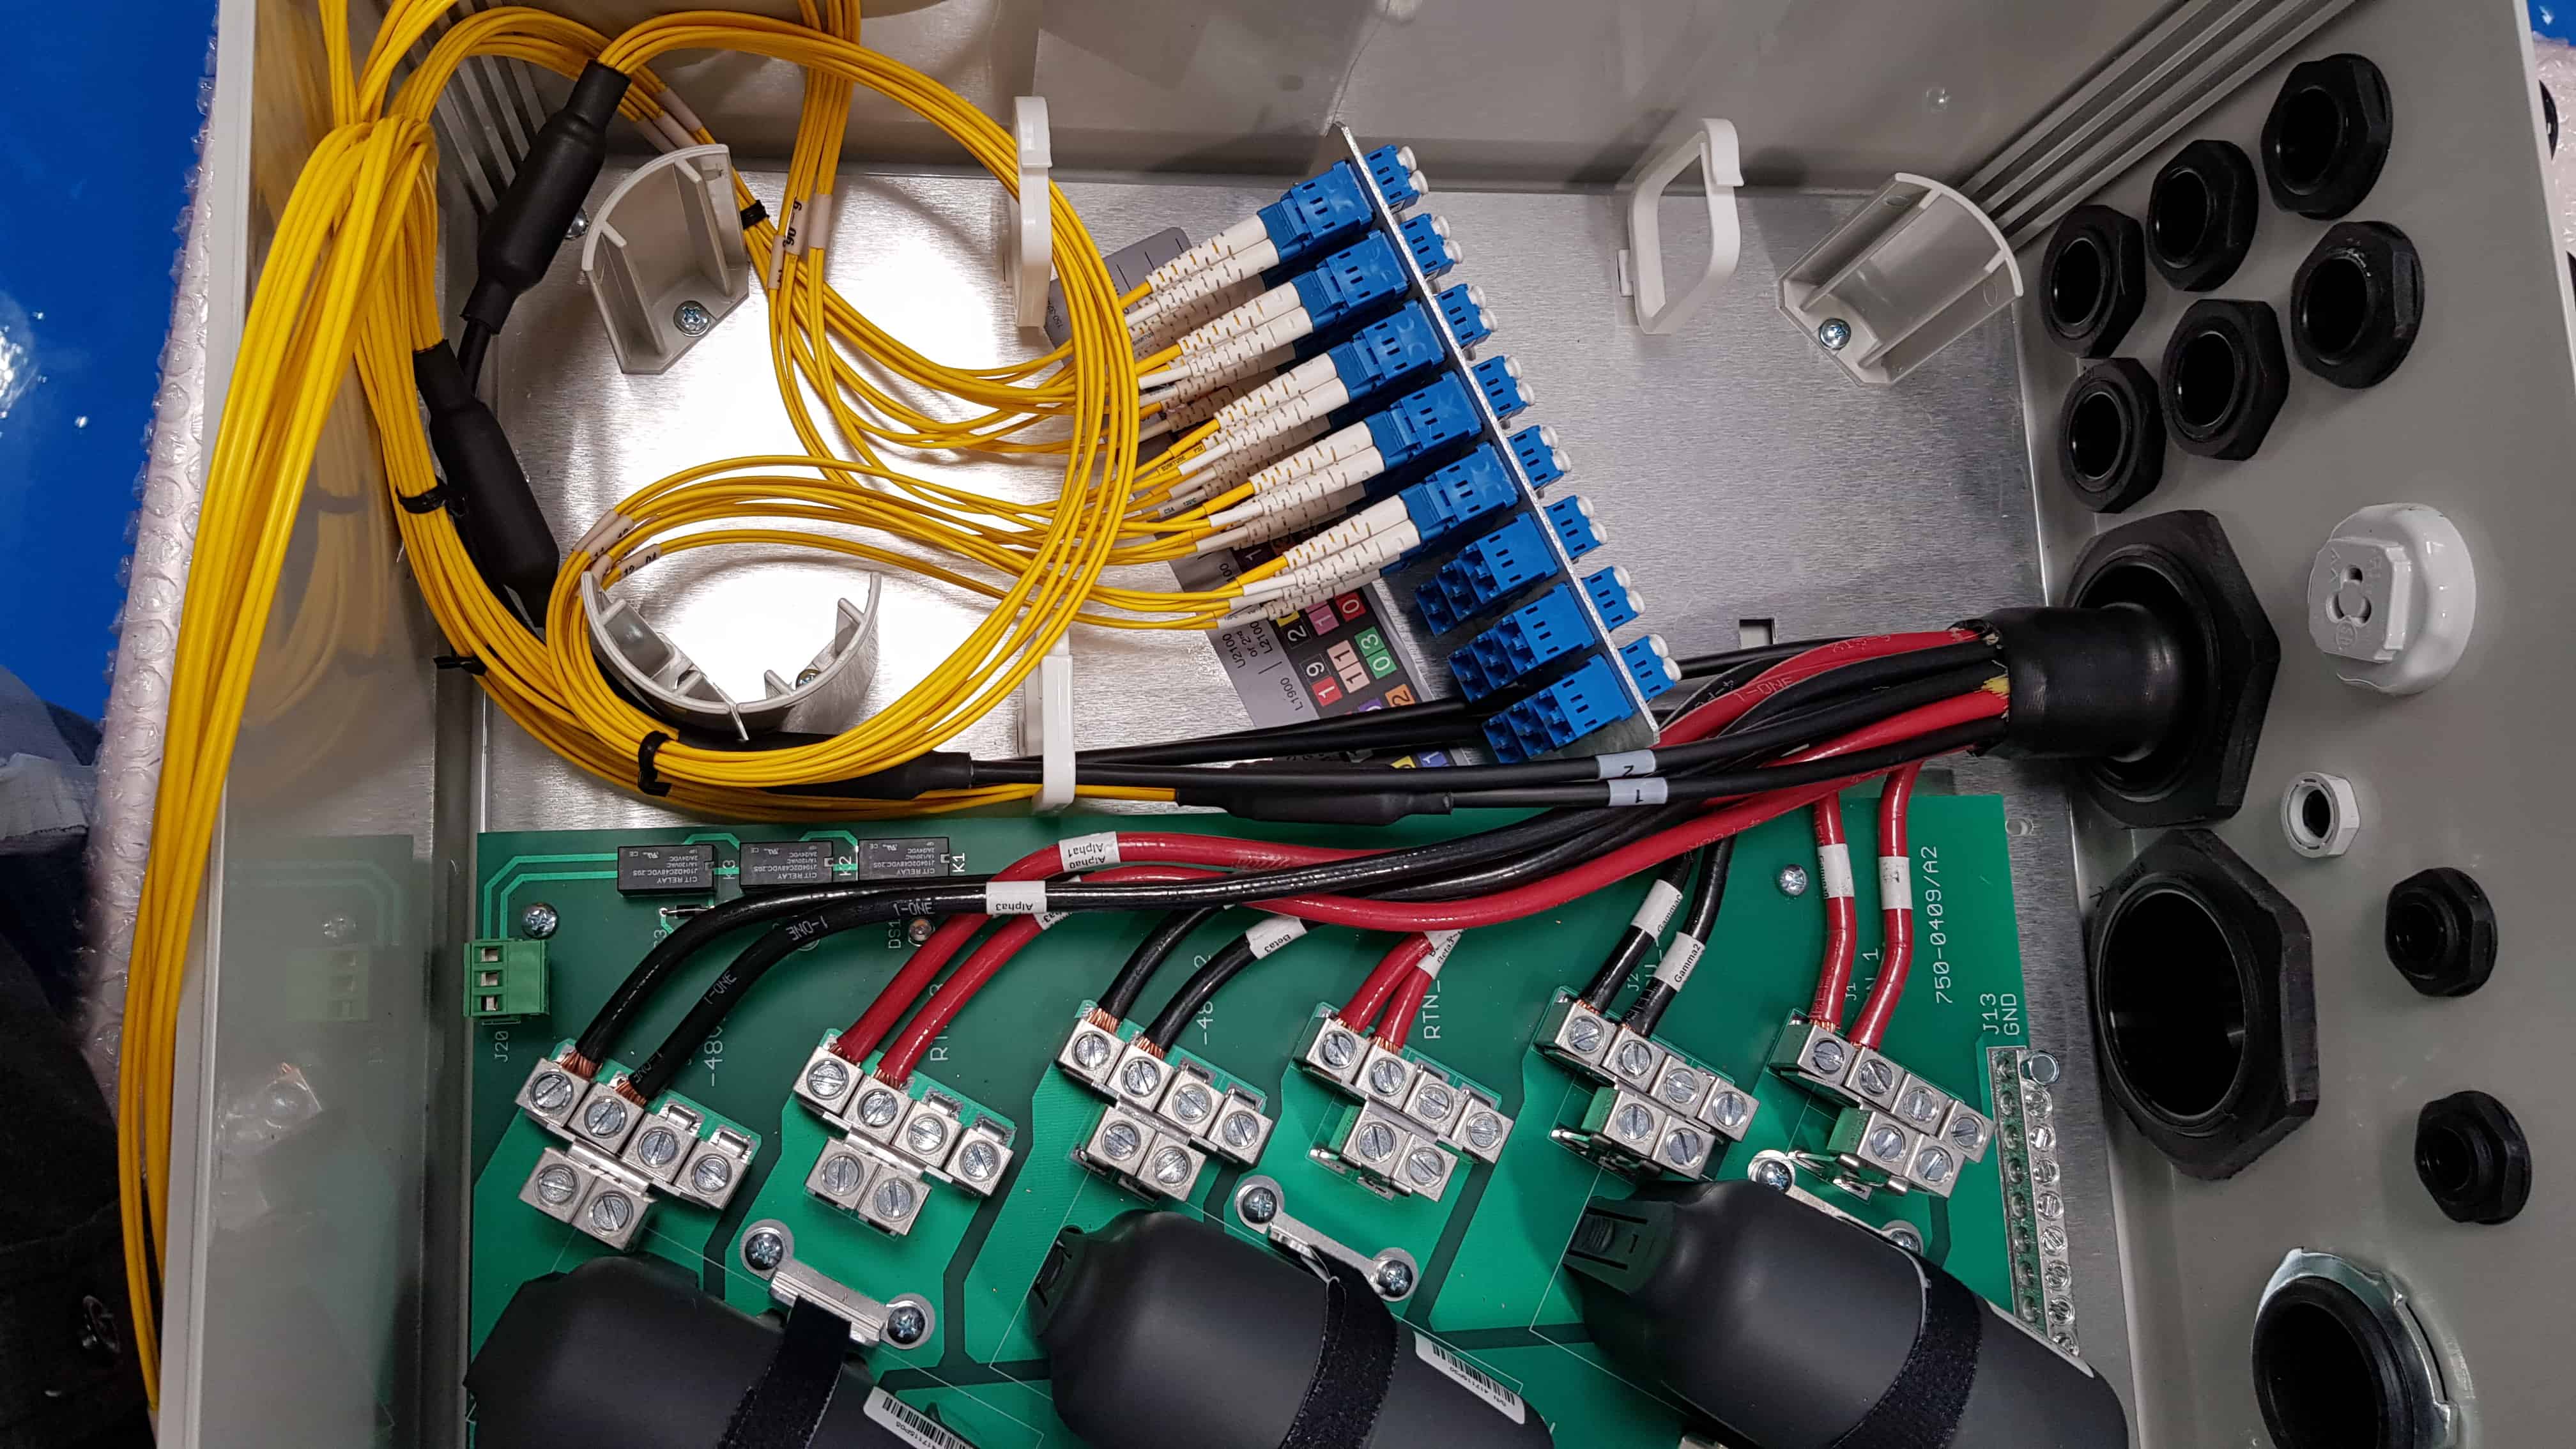 Sample box assembly with cable and various components, including enclosure.